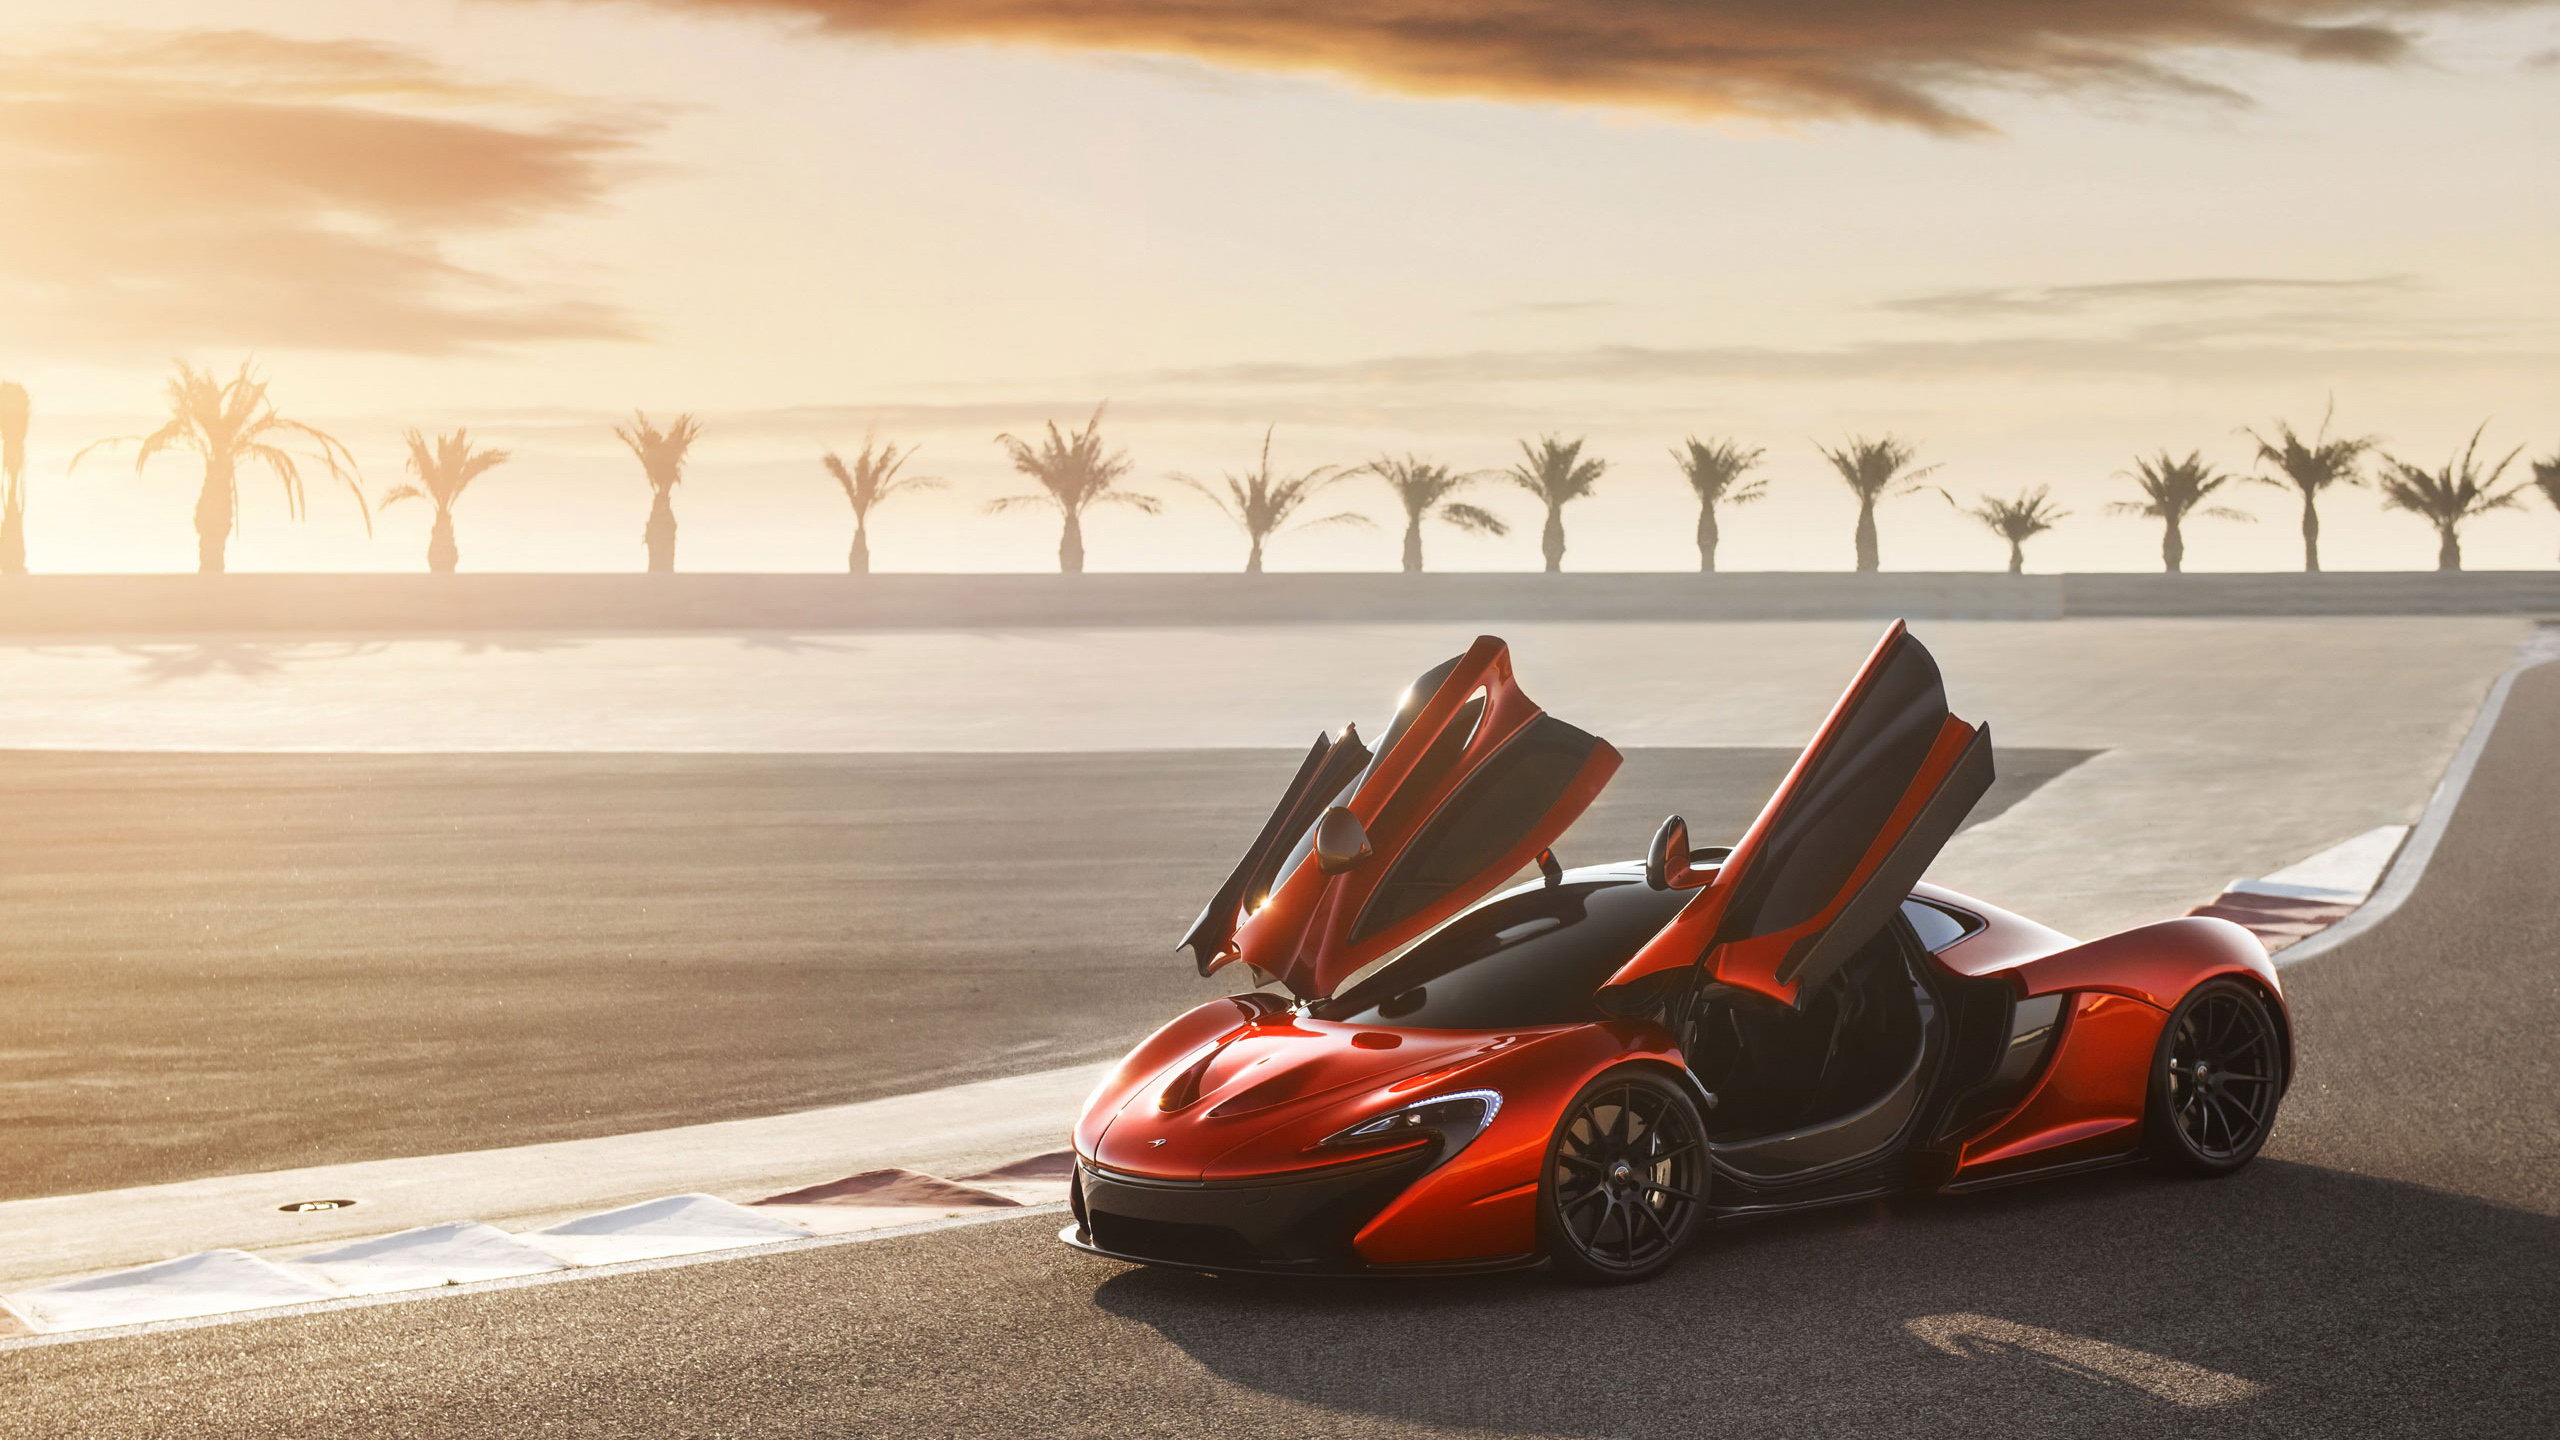 4k Wallpapers Sports Cars